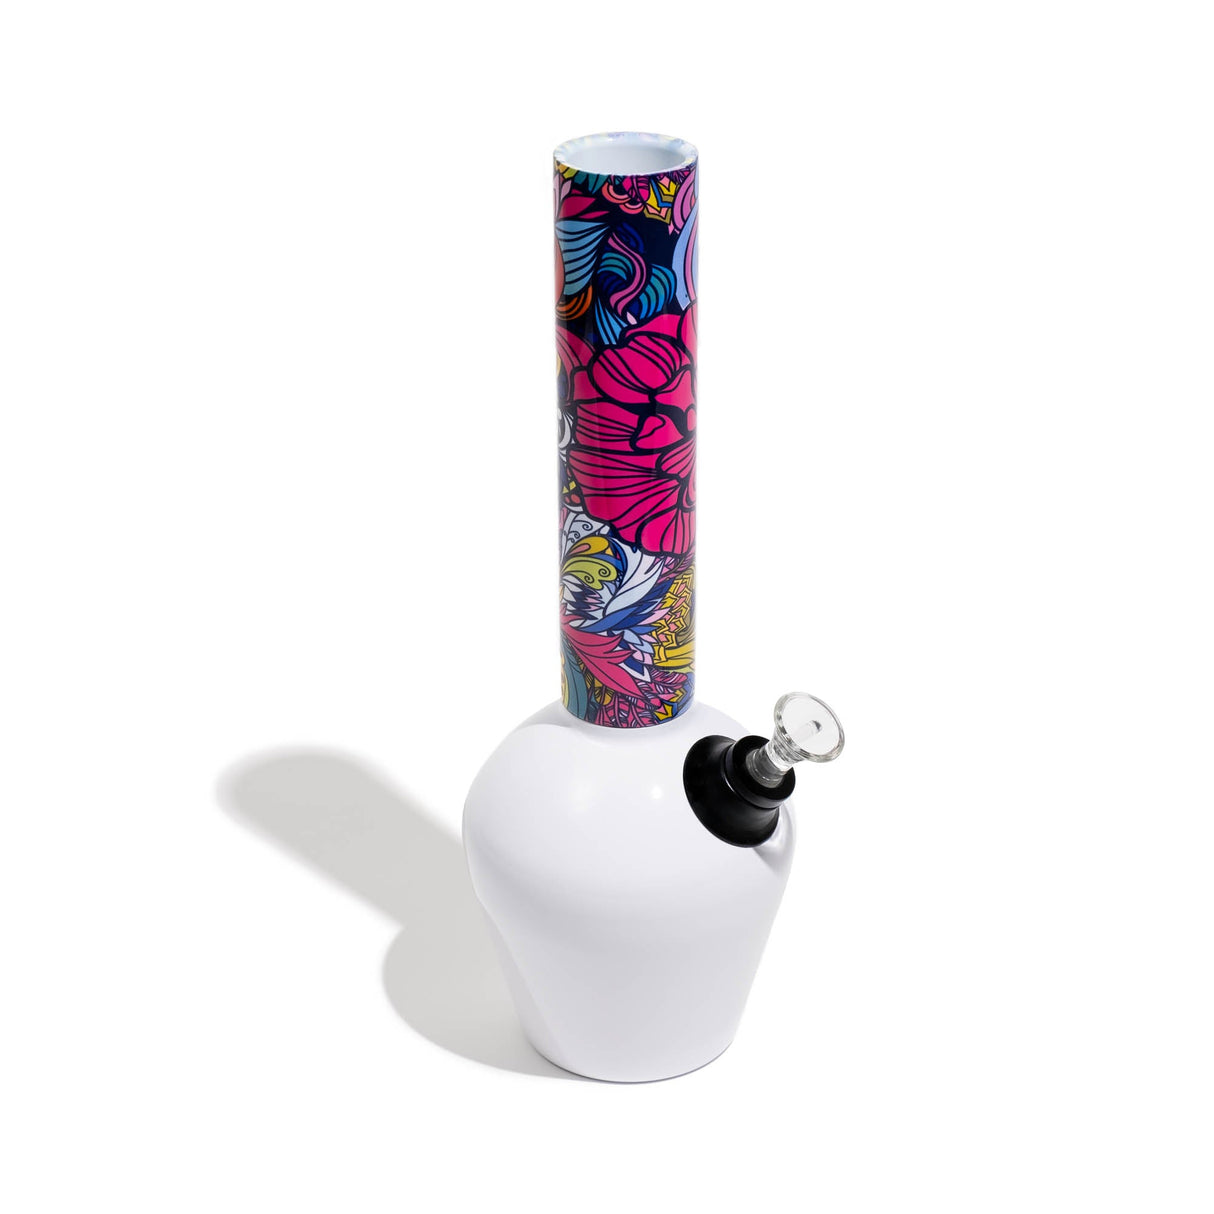 Chill Steel Pipes - Gloss White Base with Vibrant Patterned Tube - Angled View